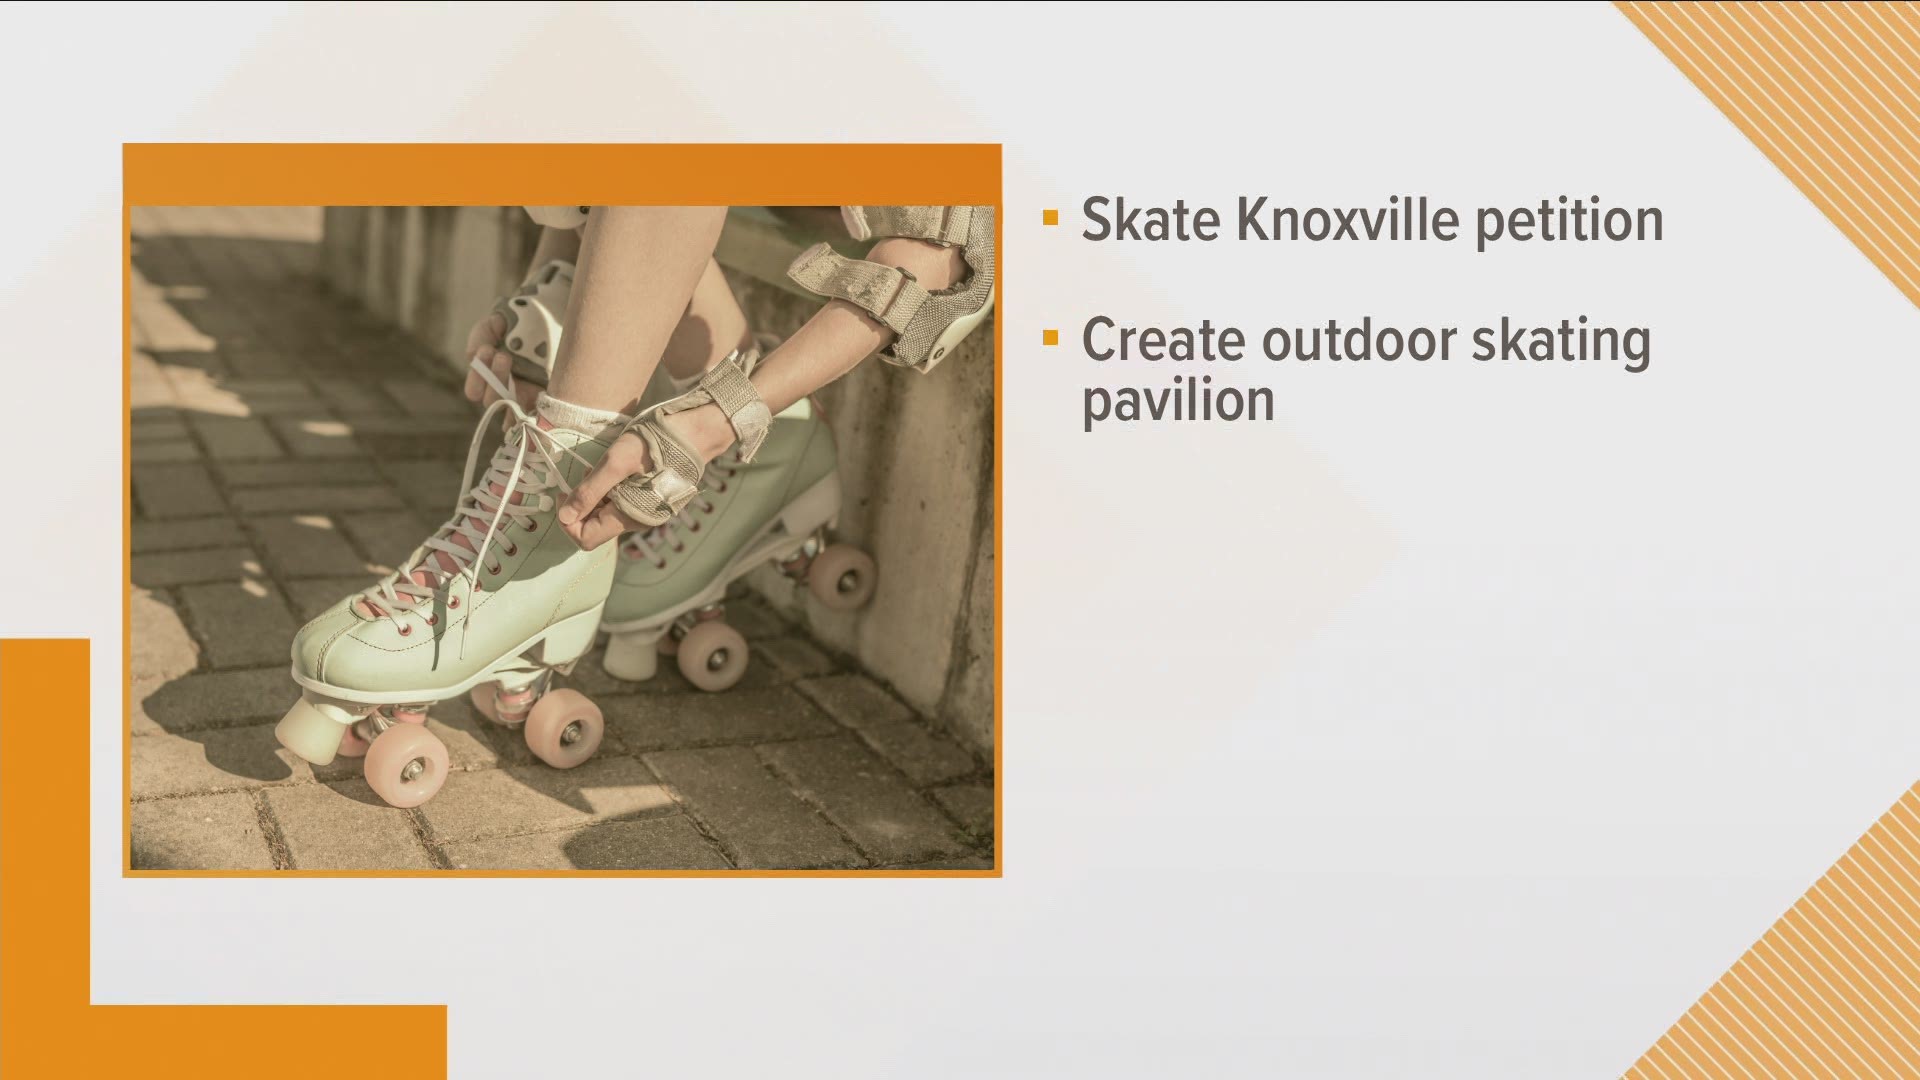 The group "Skate Knoxville" started a petition with the hope of bringing an outdoor skating pavilion to the area.